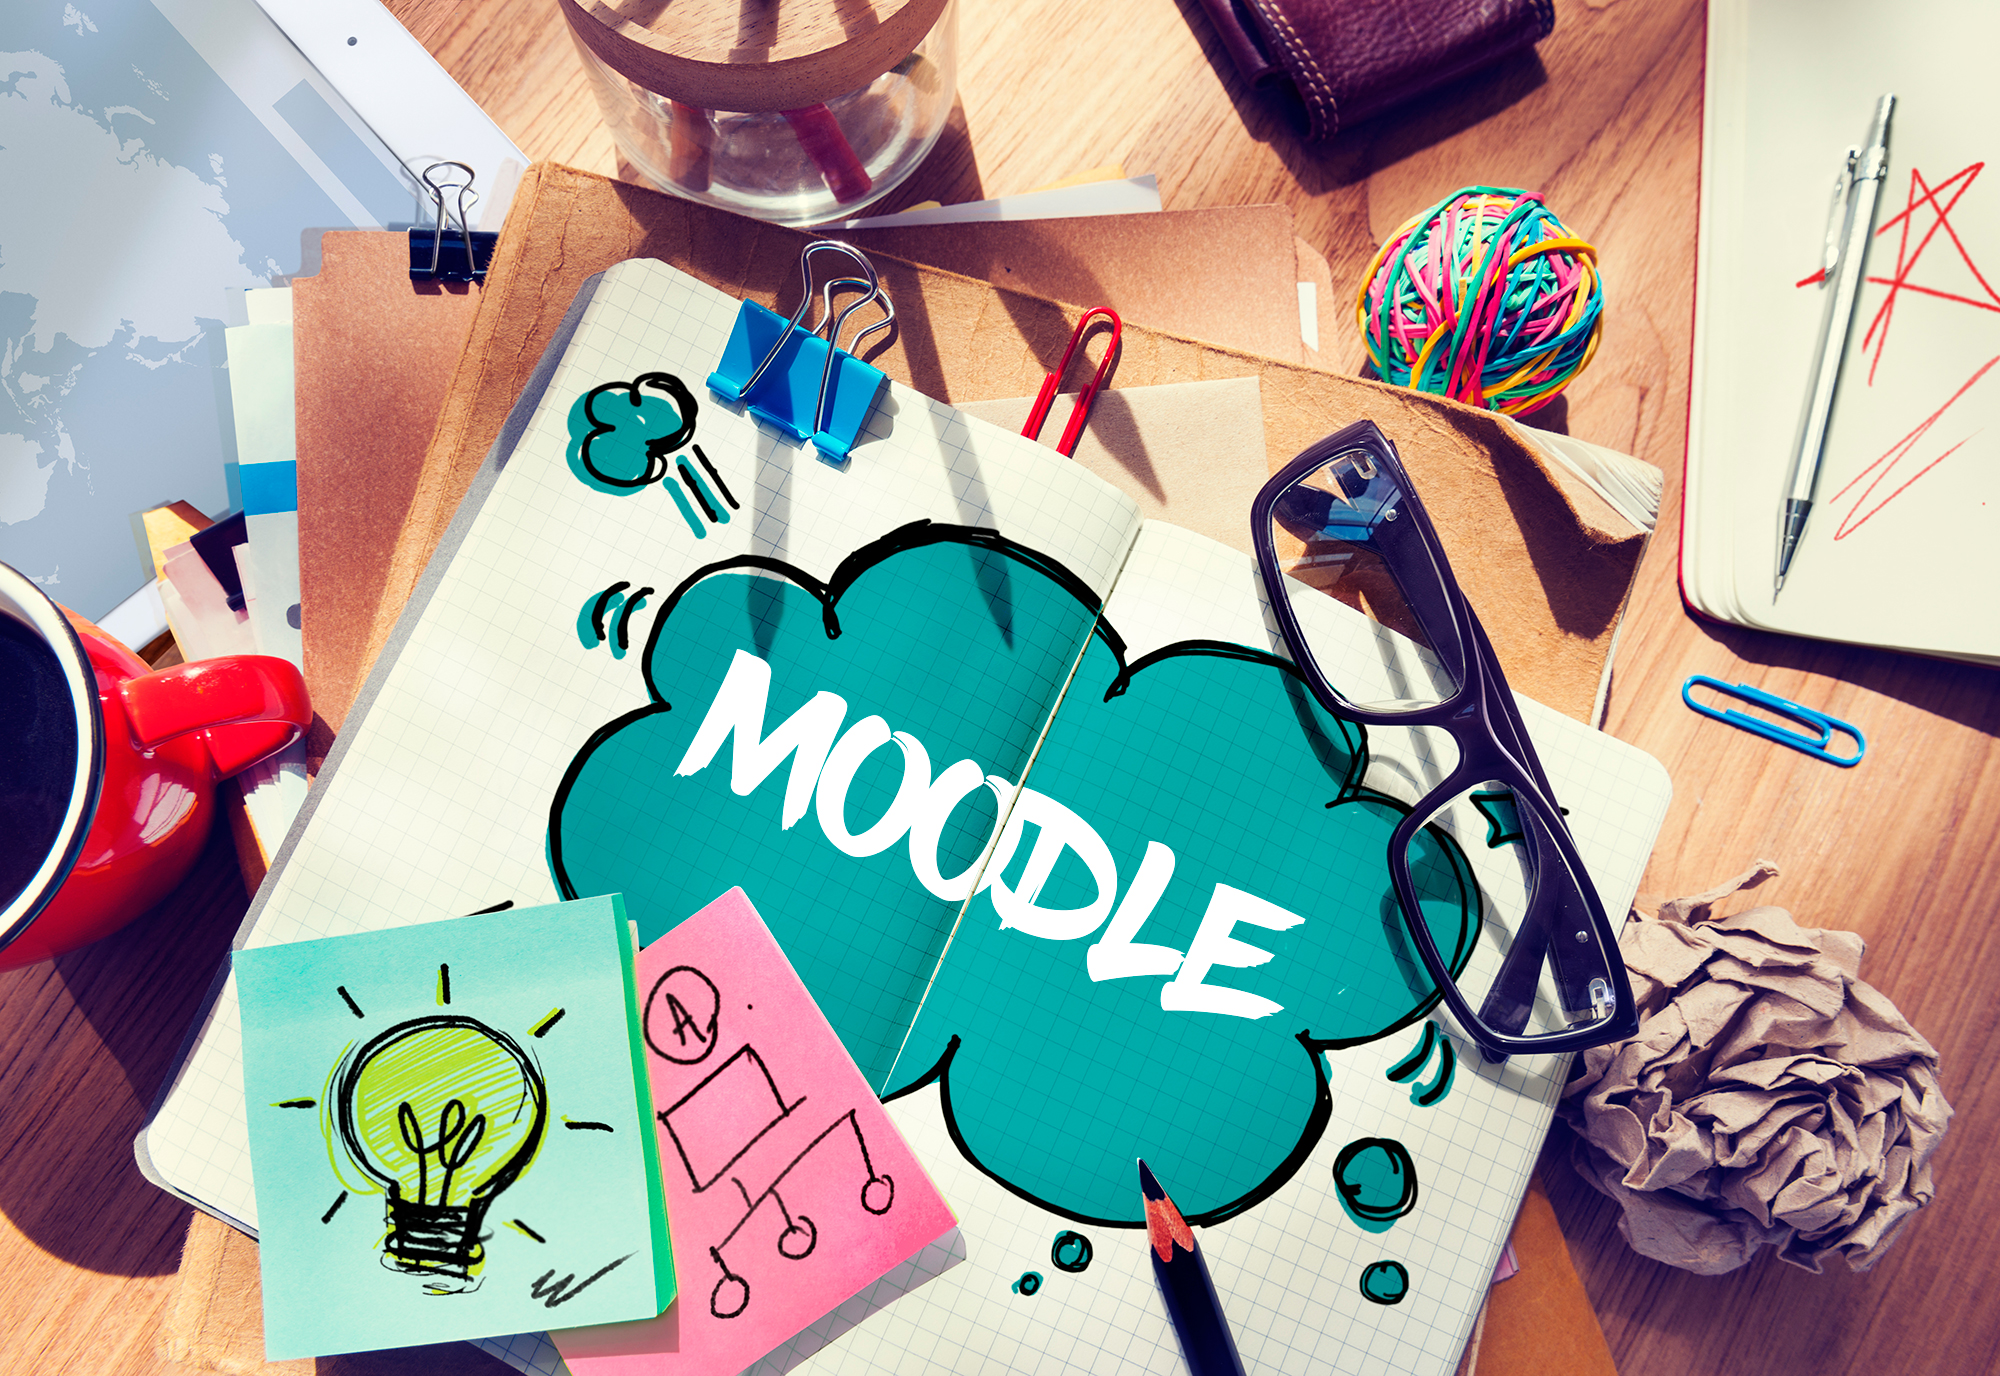 Featured Image - Moodle